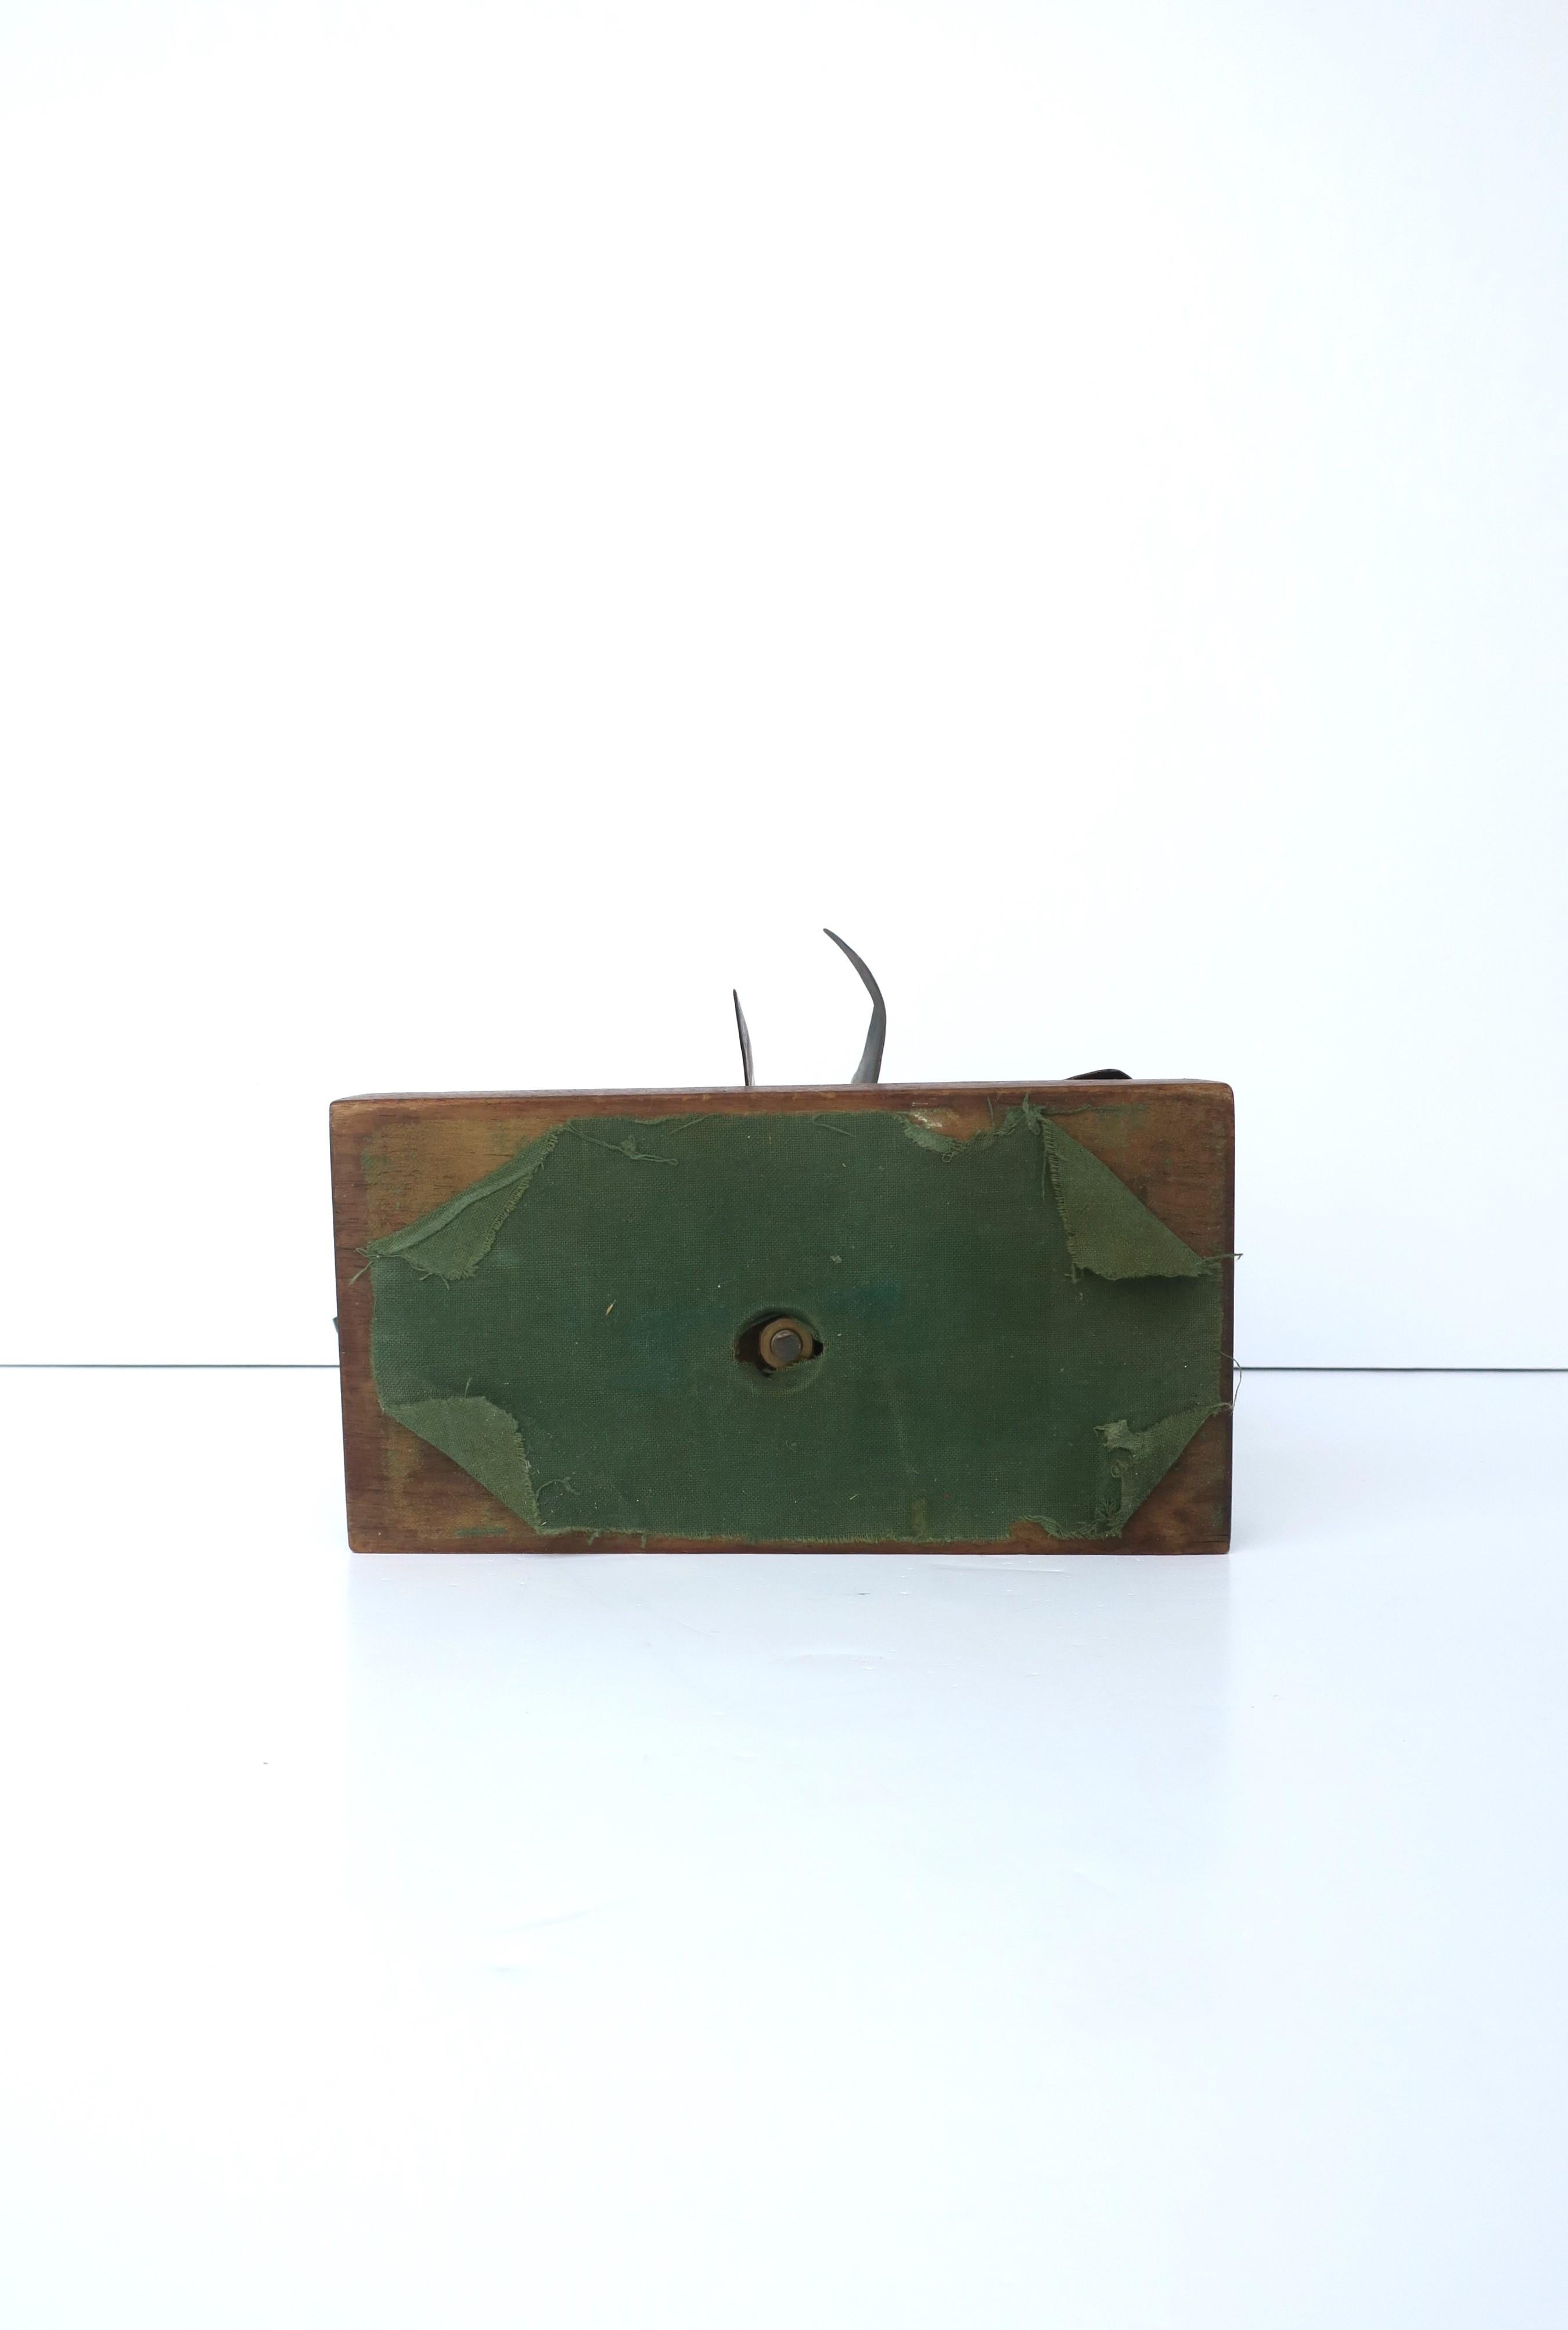 Abstract Bronzed Copper Sculpture, circa 1960s For Sale 8